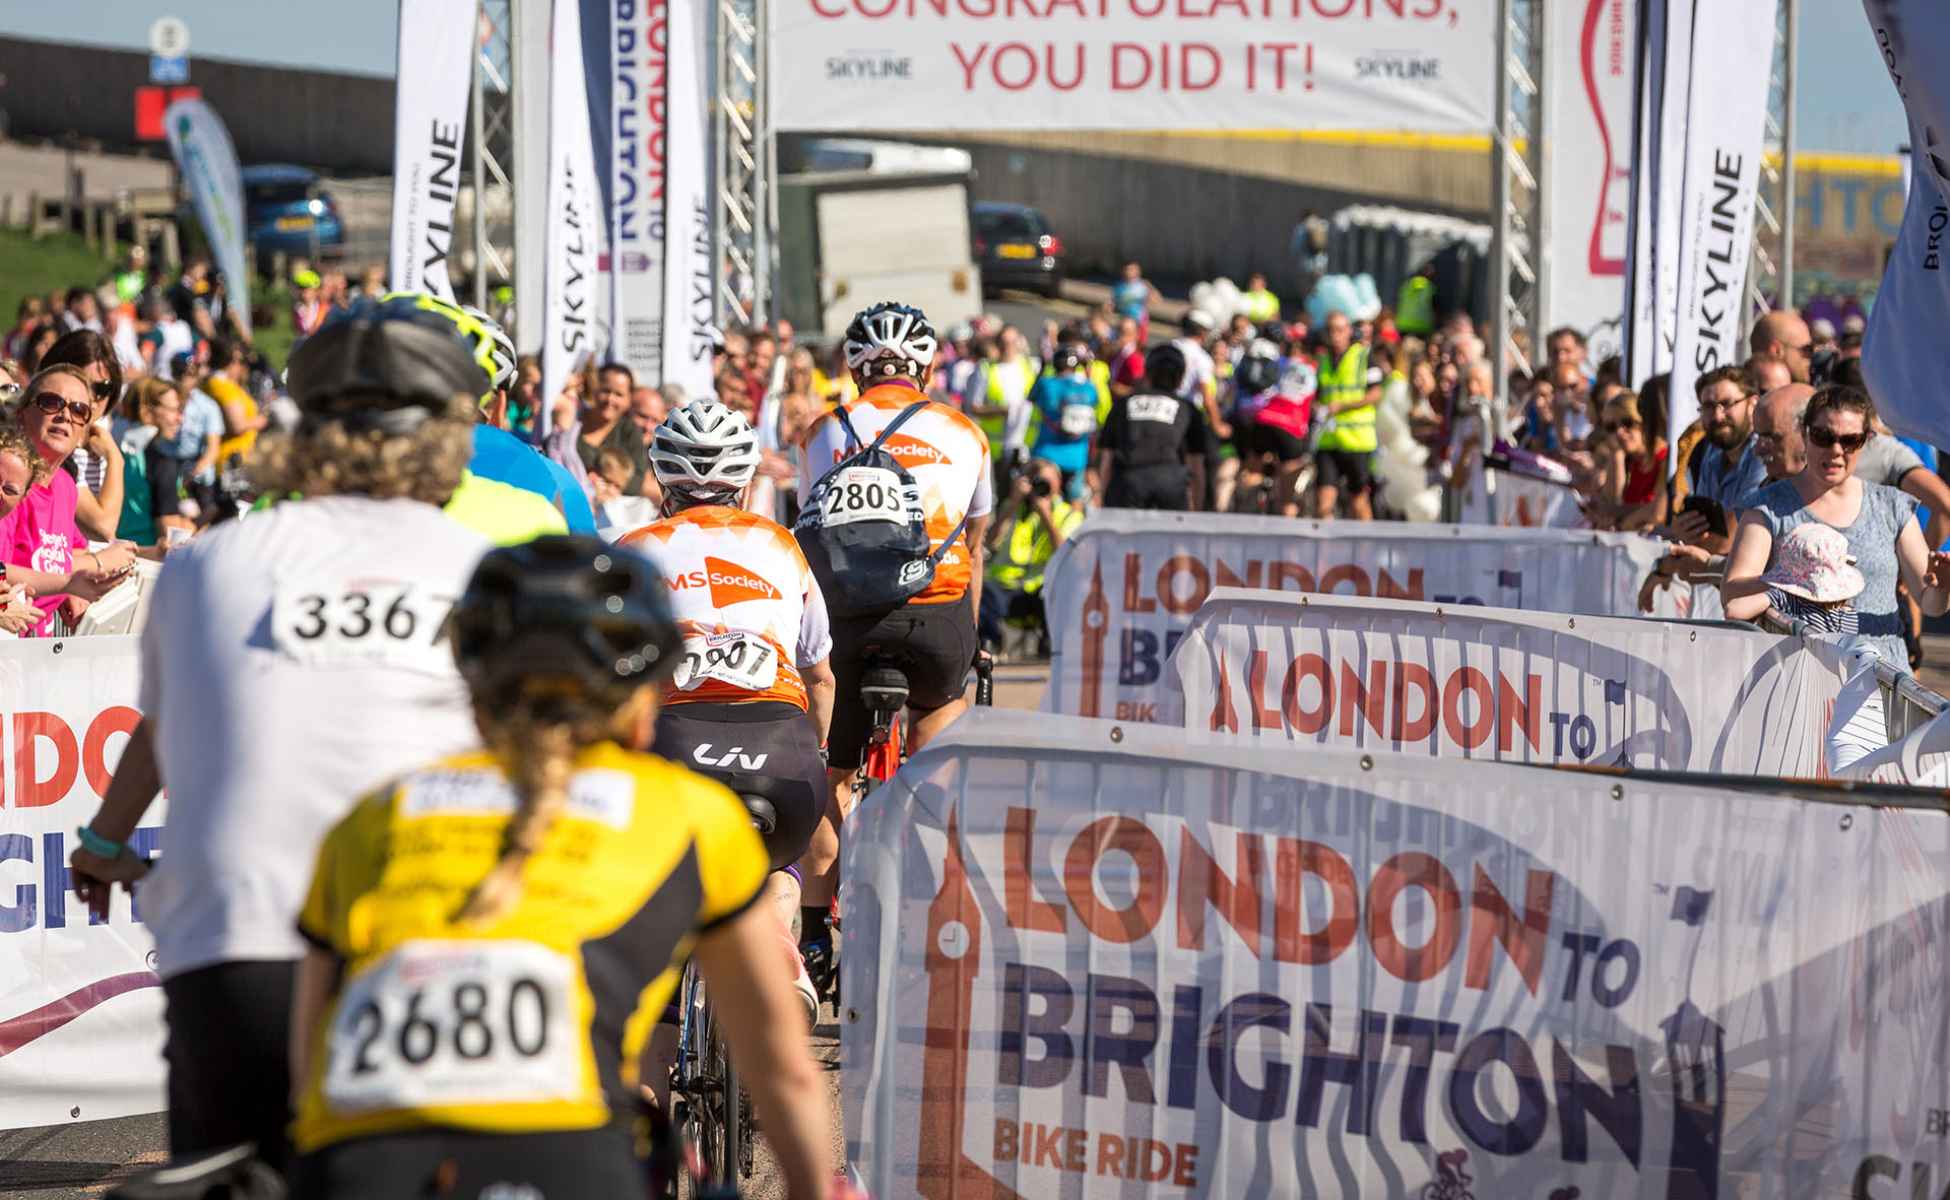 Cyclists riding in the London to Brighton Bike Ride